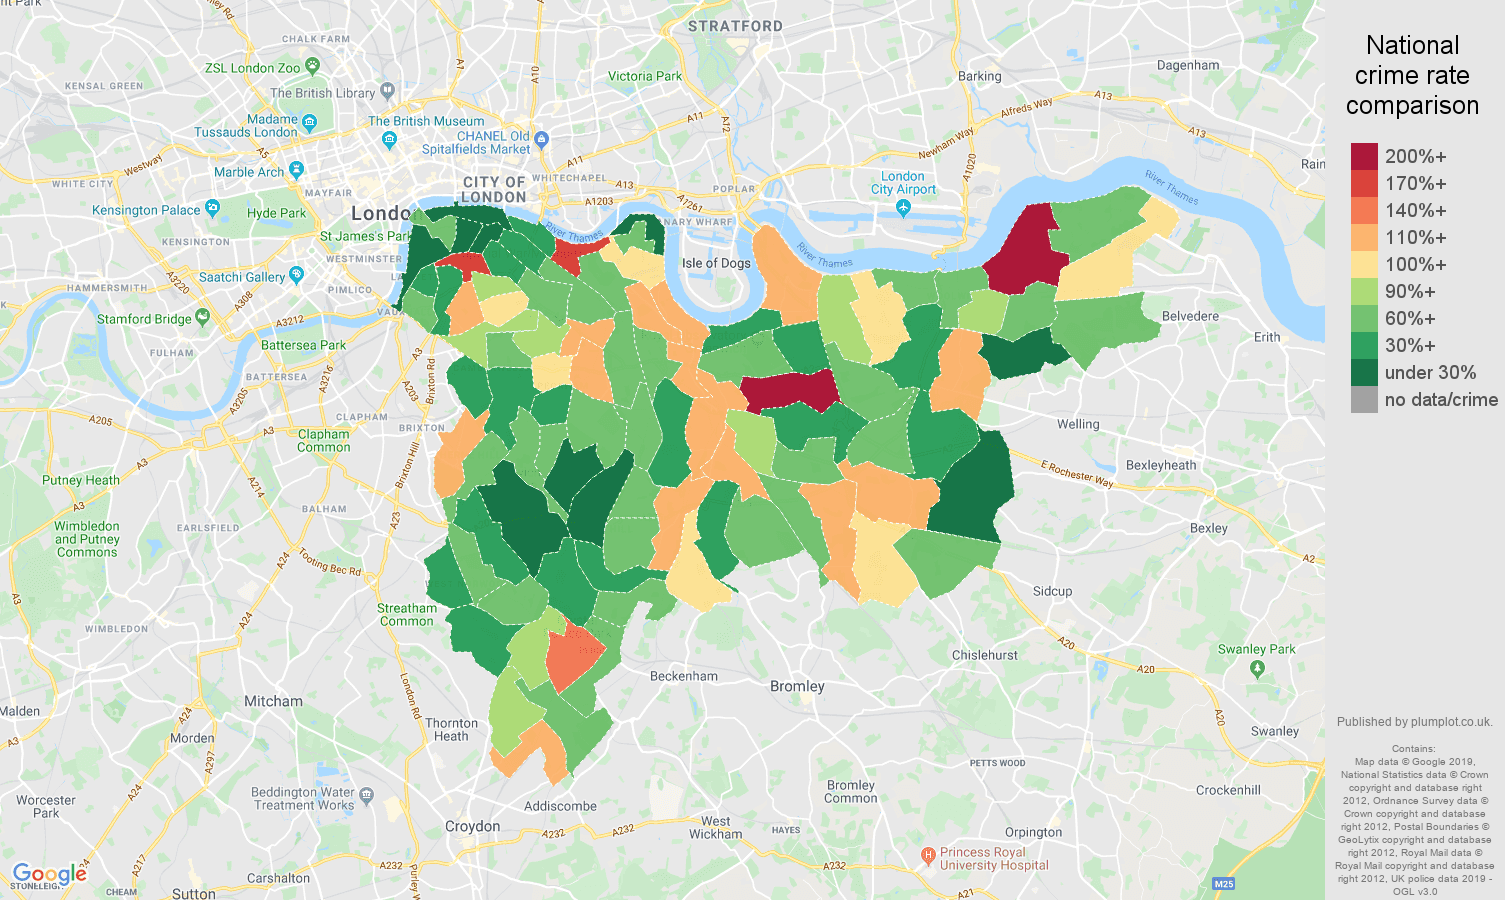 South East London other crime rate comparison map